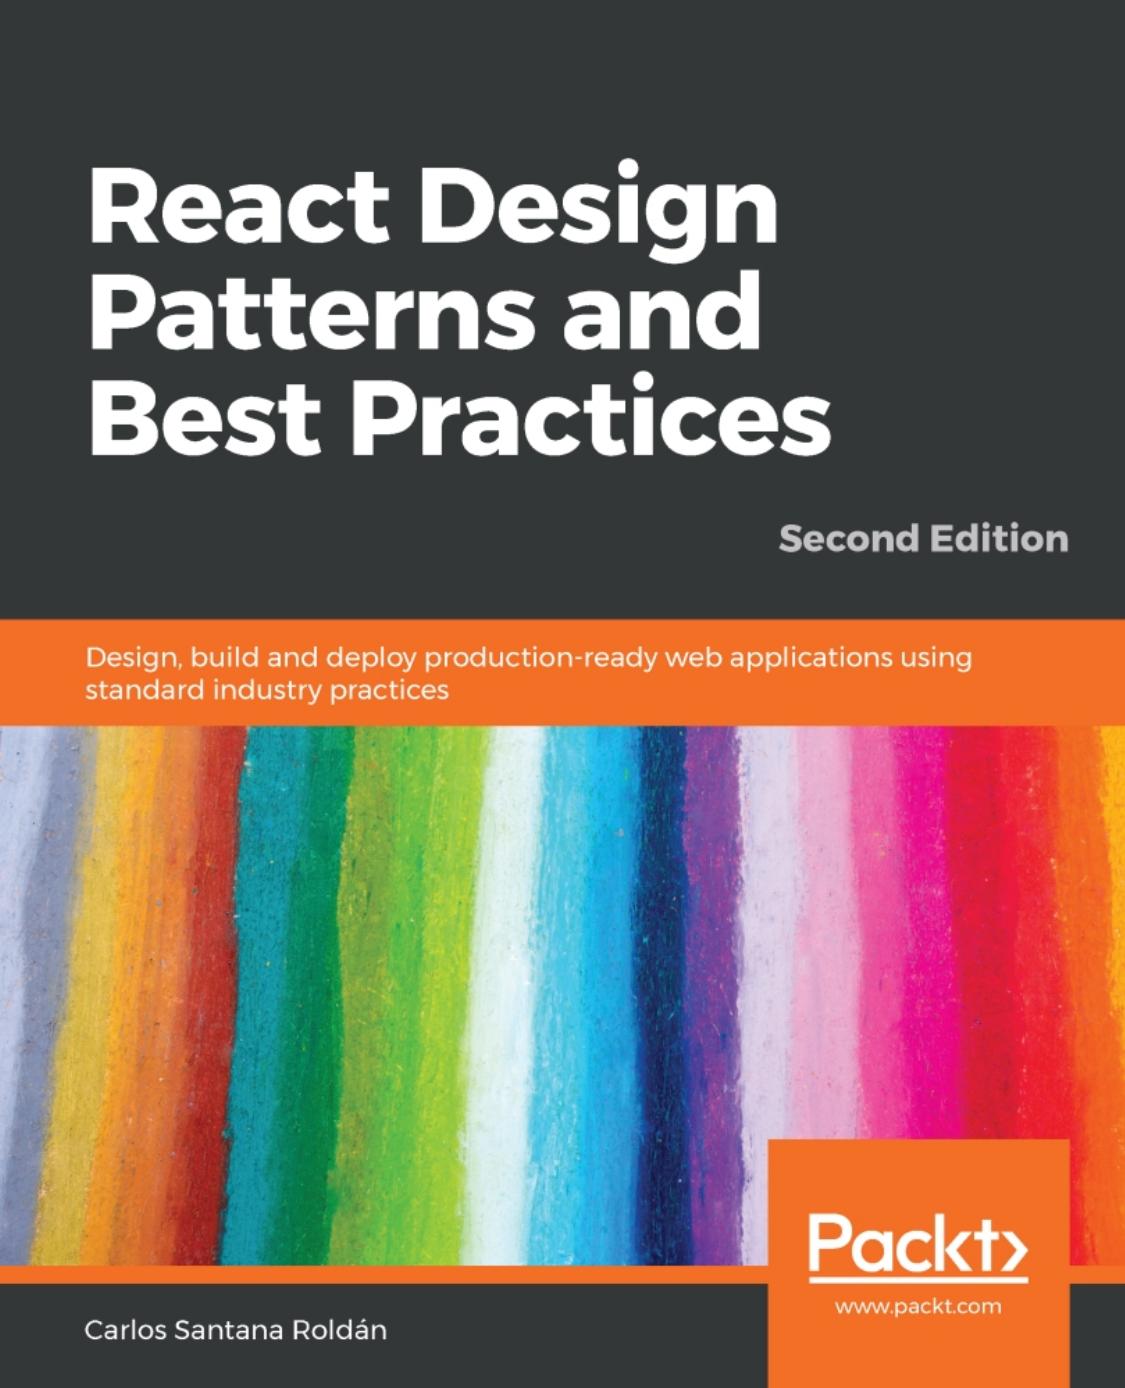 React Design Patterns and Best Practices: Design, Build and Deploy Production-Ready Web Applications Using Standard Industry Practices, 2nd Edition